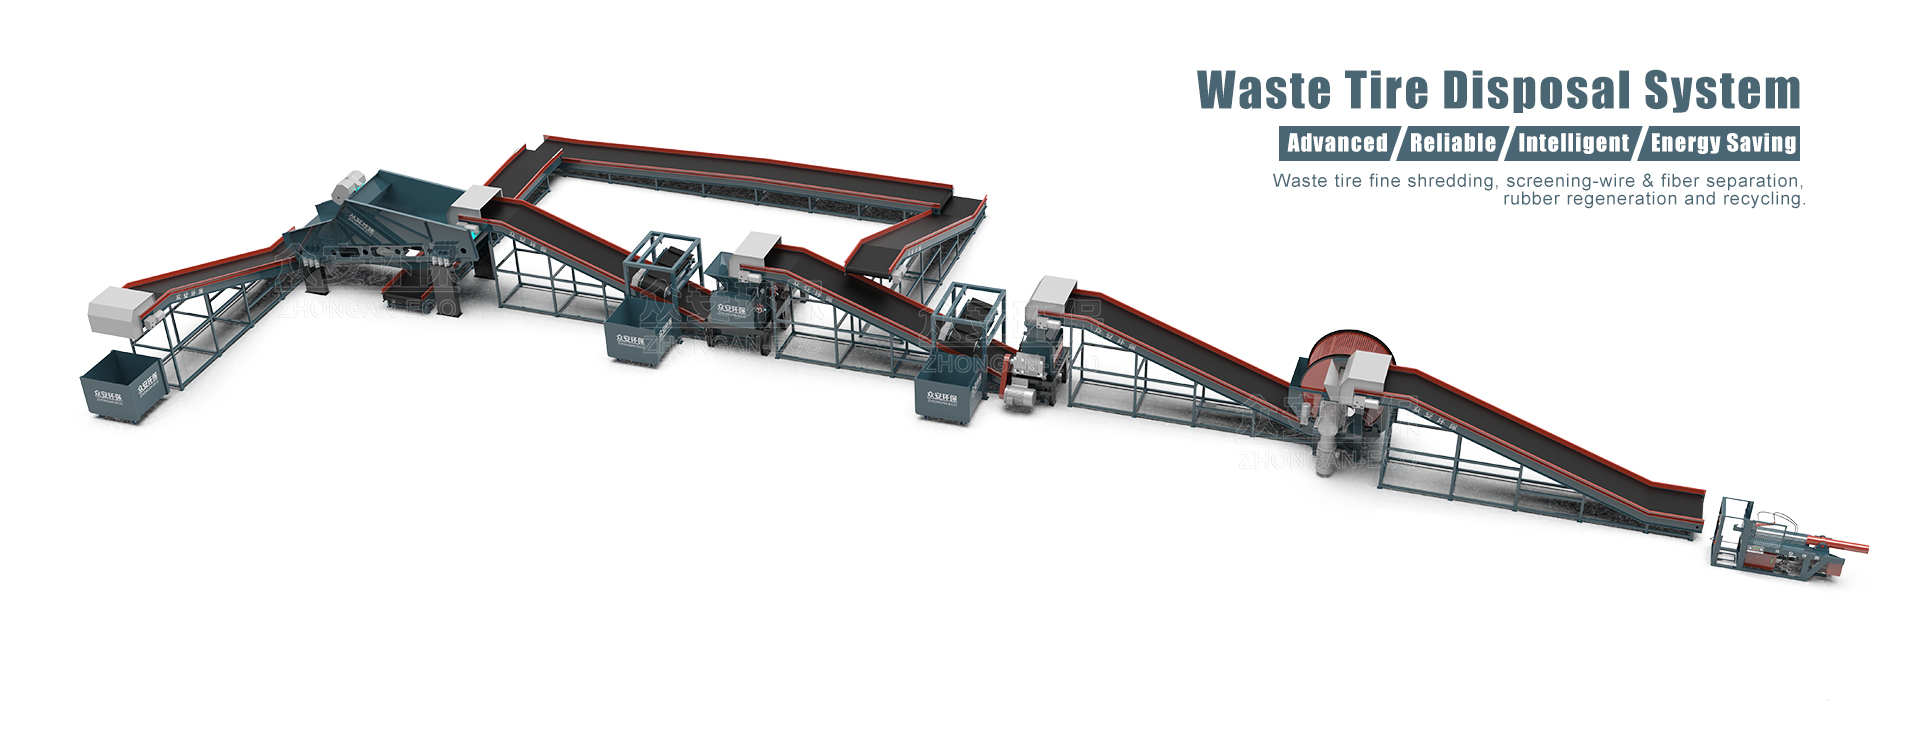 Waste Tire Disposal System